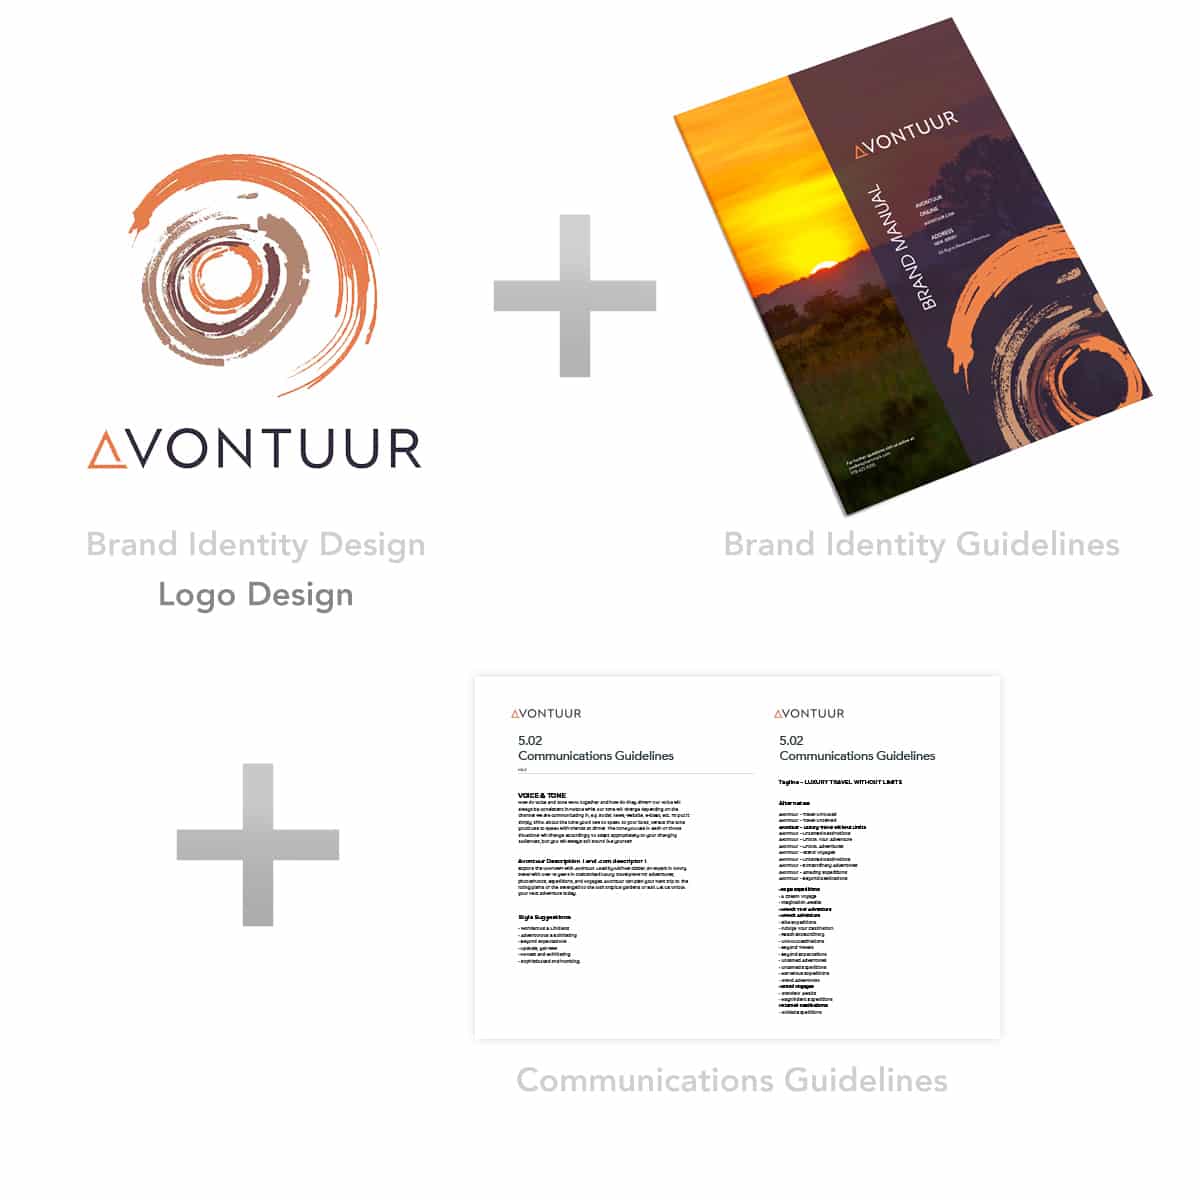 Brand Identity Design + Brand Identity Guidelines + Communications Guidelines - $7,500